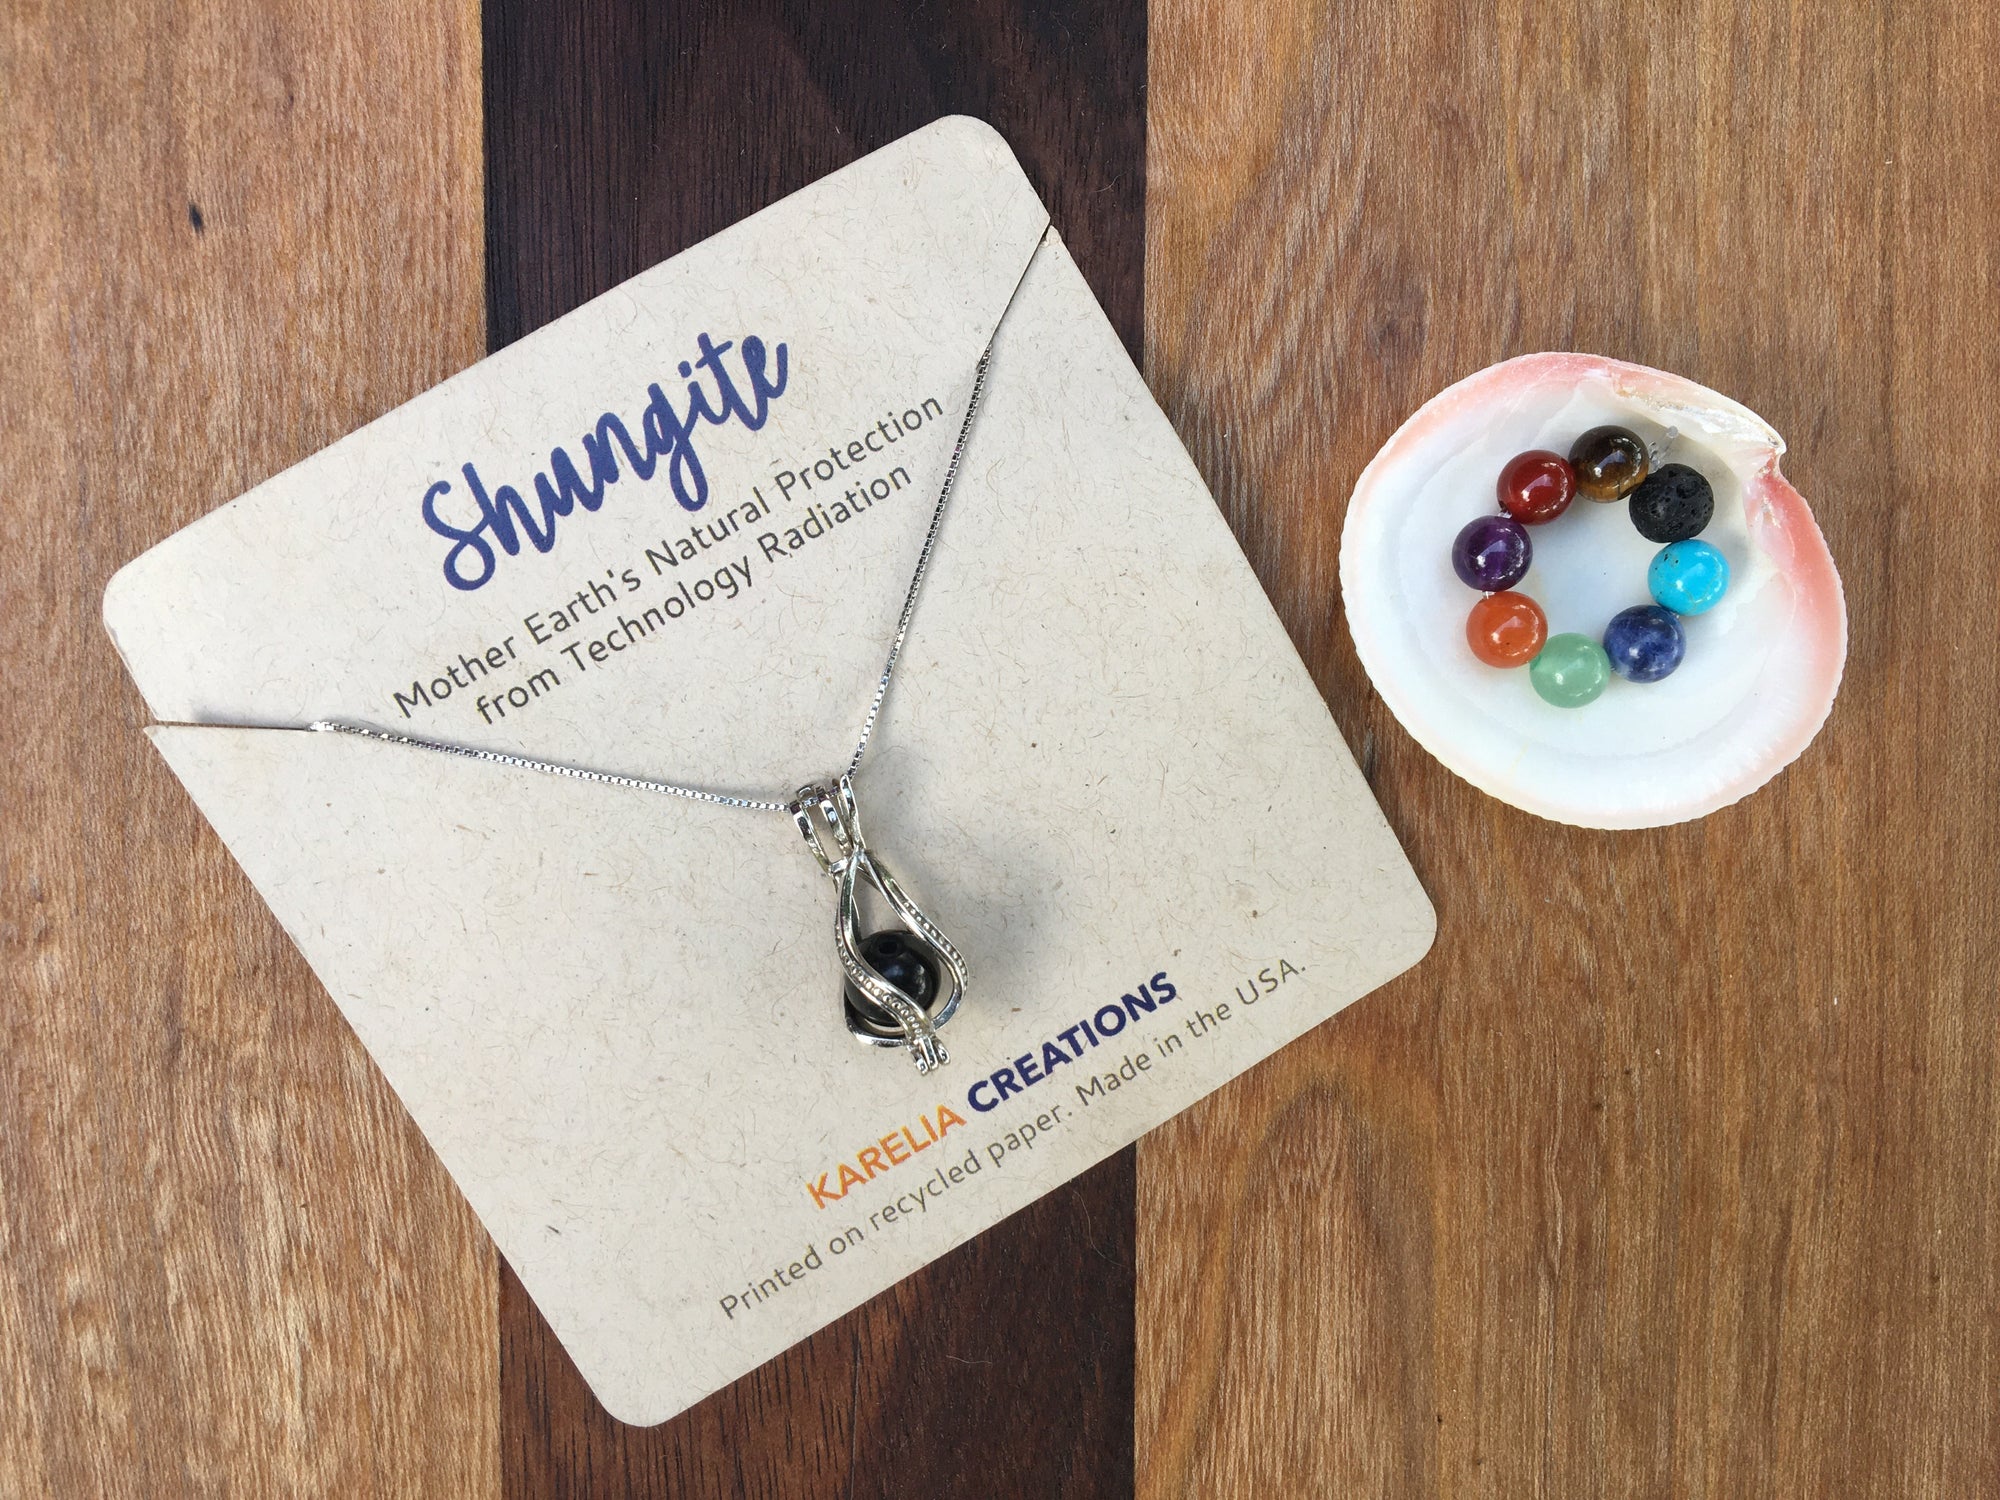 Sterling Silver Interchangeable Shungite Pendant and 18-Inch Necklace - Includes Shungite, Lava Stone for Aromatherapy and 7 Other Gemstones - Chakra